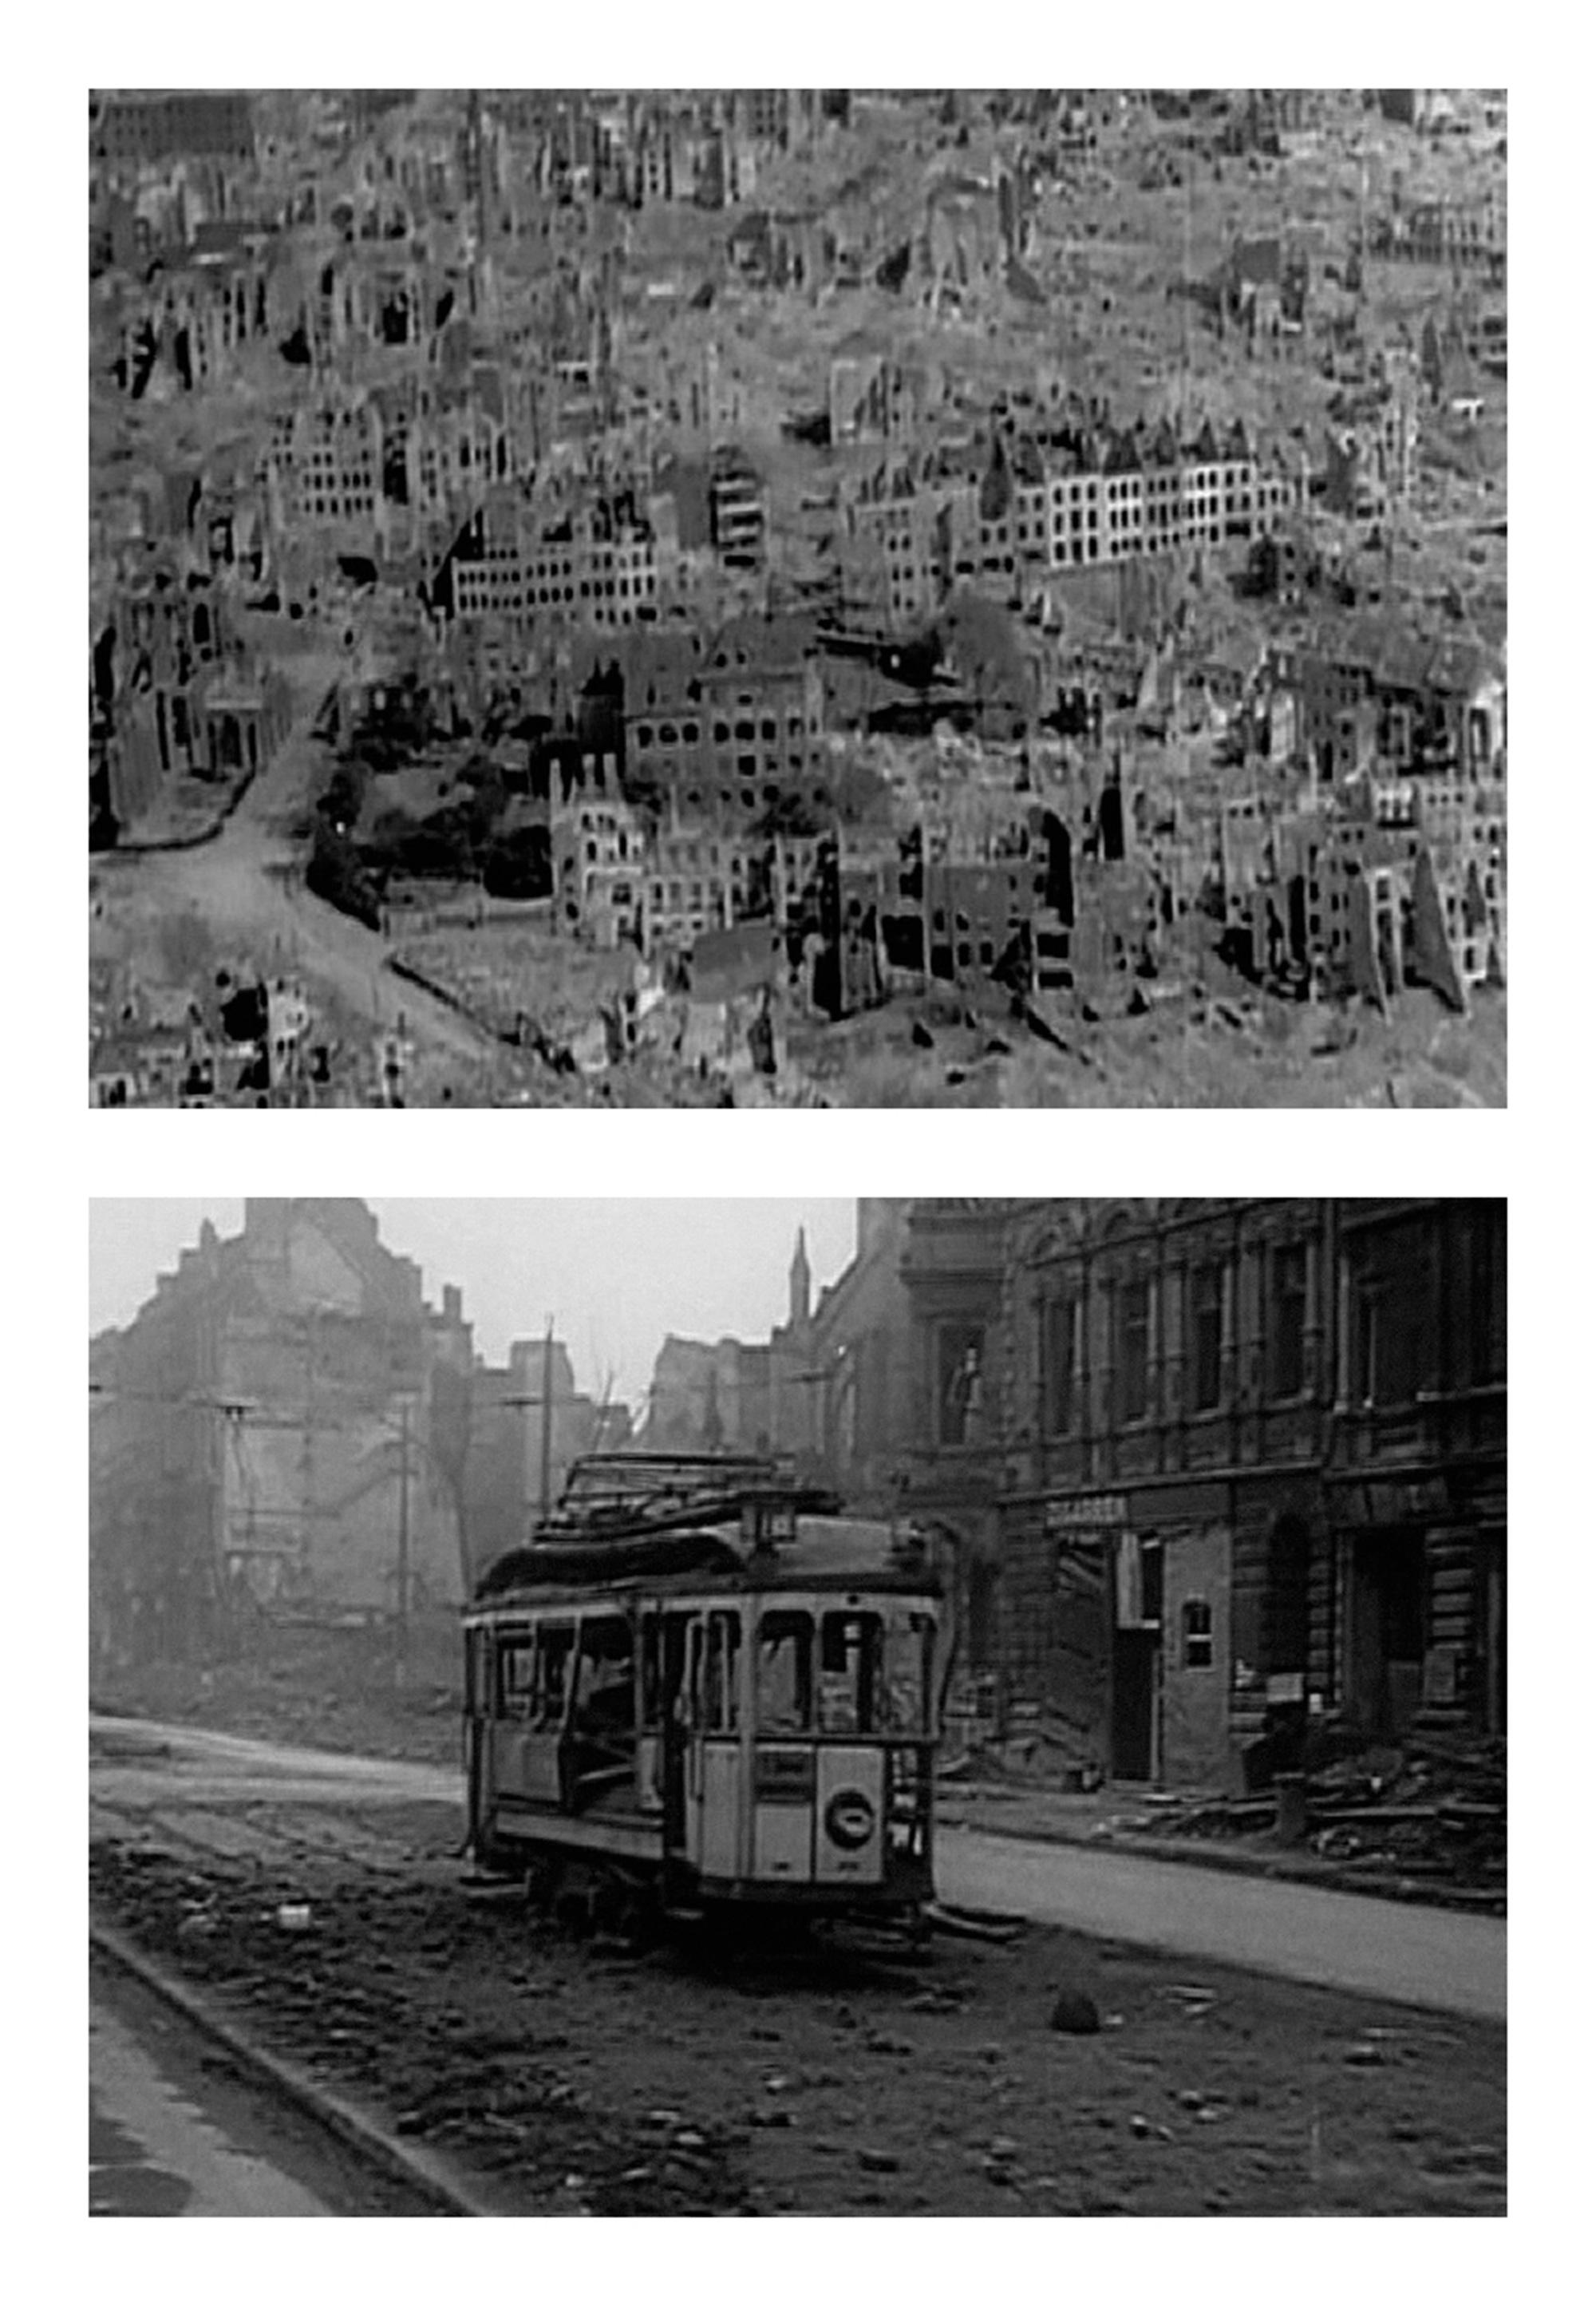 Two March nineteen forty-five film stills that shows the ruins of Cologne, Germany, as filmed by occupying US forces.